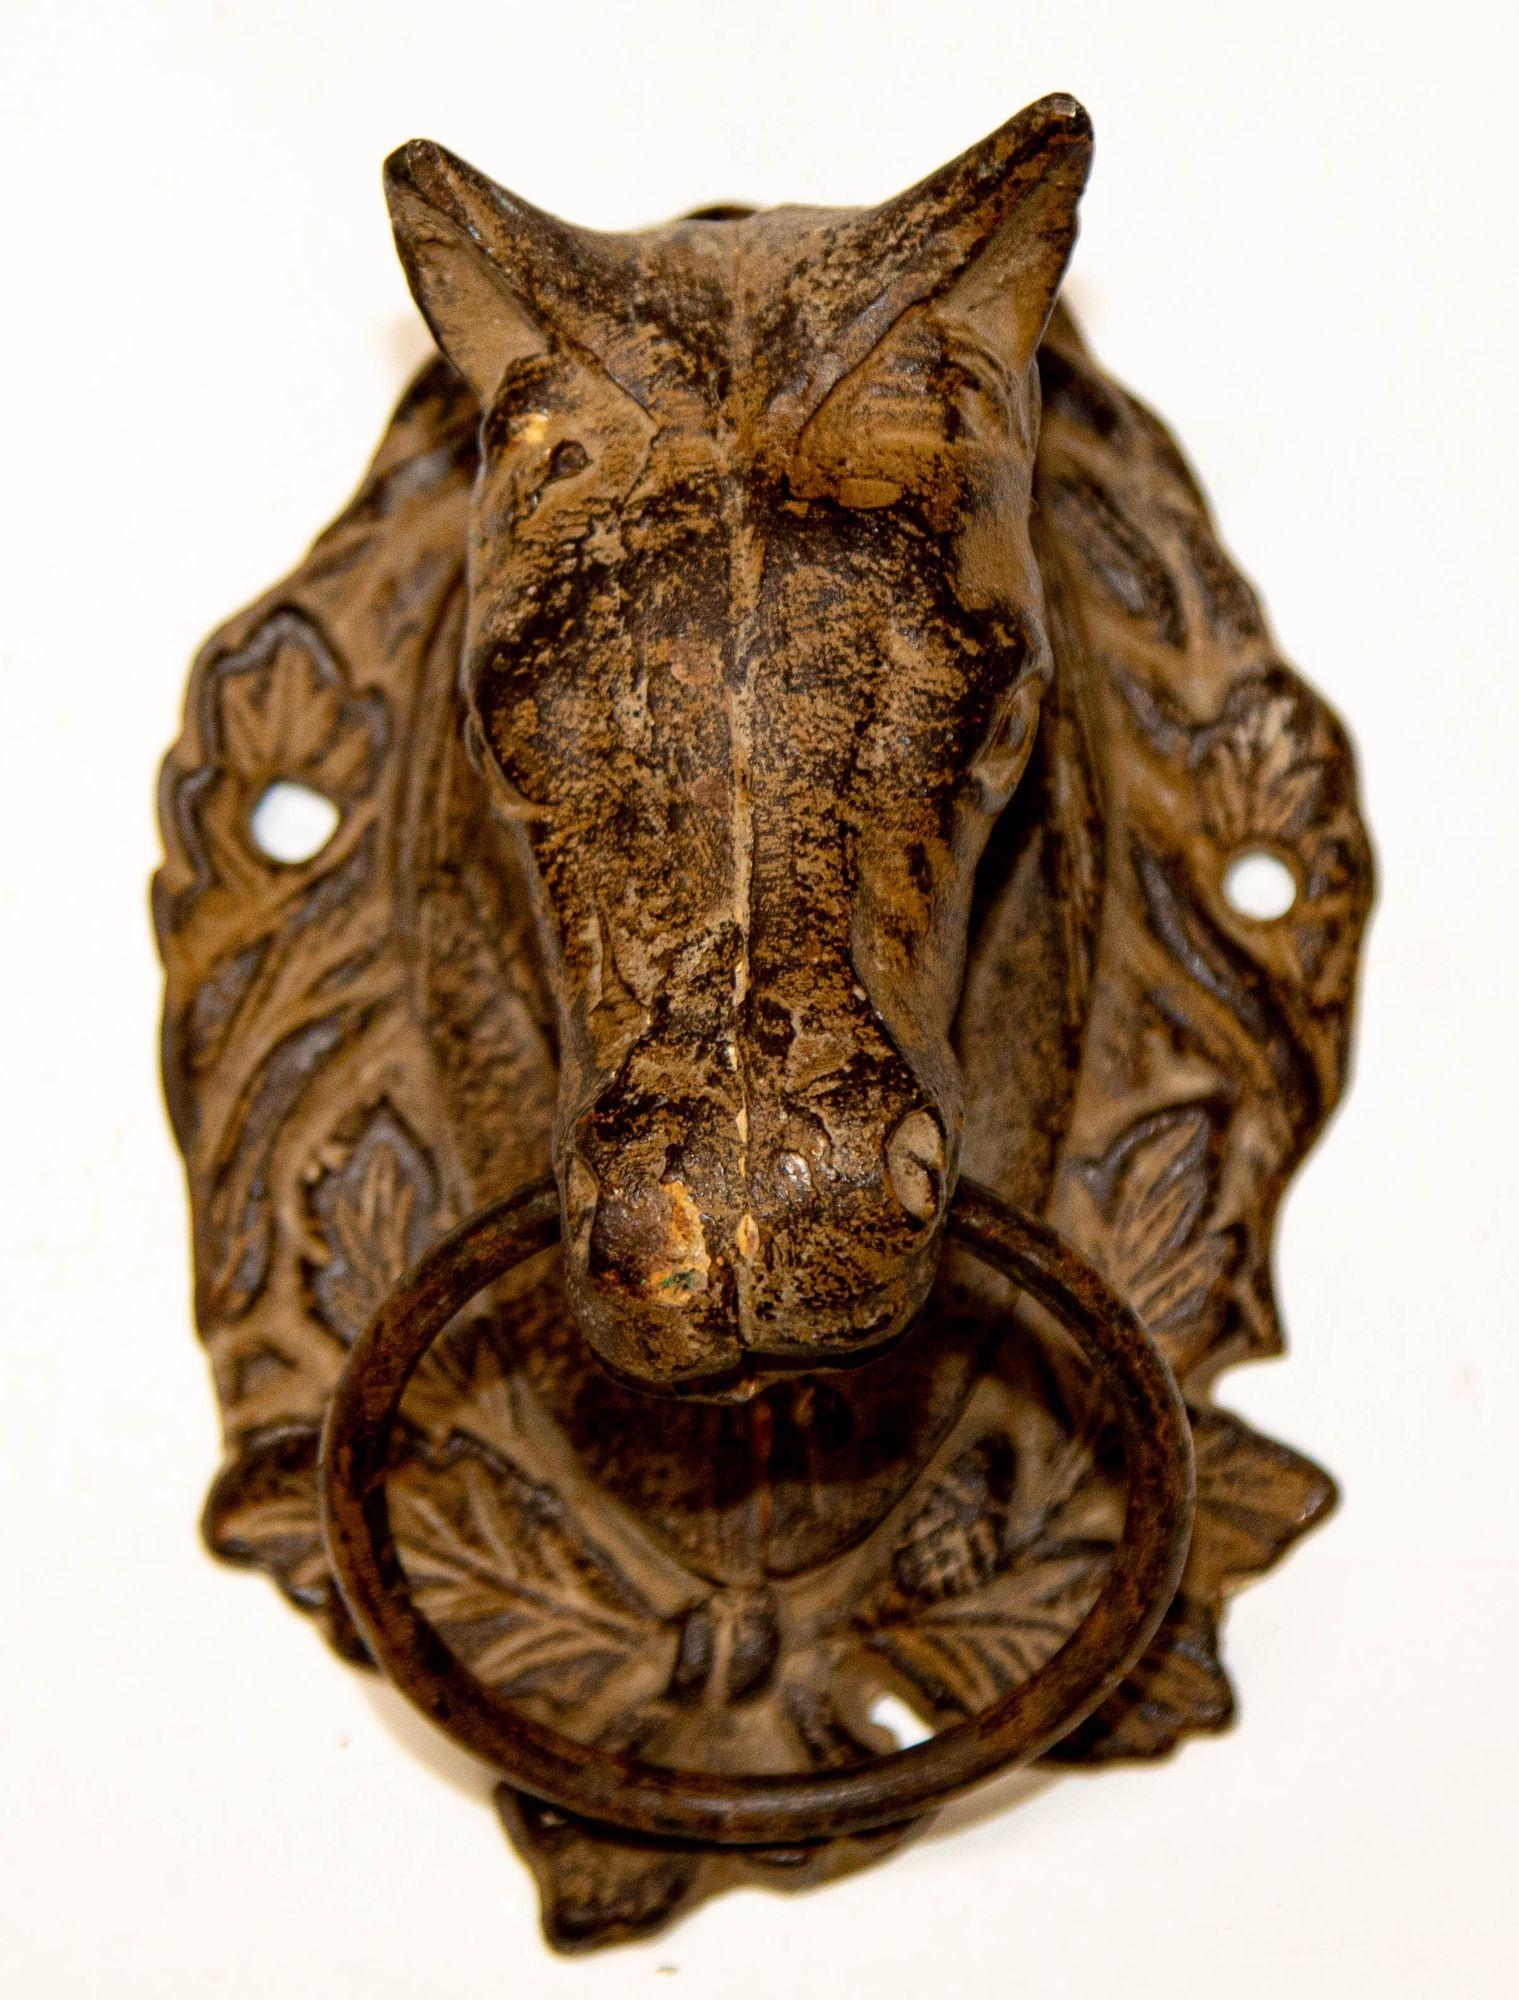 Vintage Large Cast Iron Horse Head Towel Wash Cloth Rag Ring Hook Hanger Wall Mount.
Metal horse heads with ornate ring used as towel holder, door knocker or for just an equestrian decor.
Cast Iron Horse Door Knocker, Equestrian wall Decor or Front